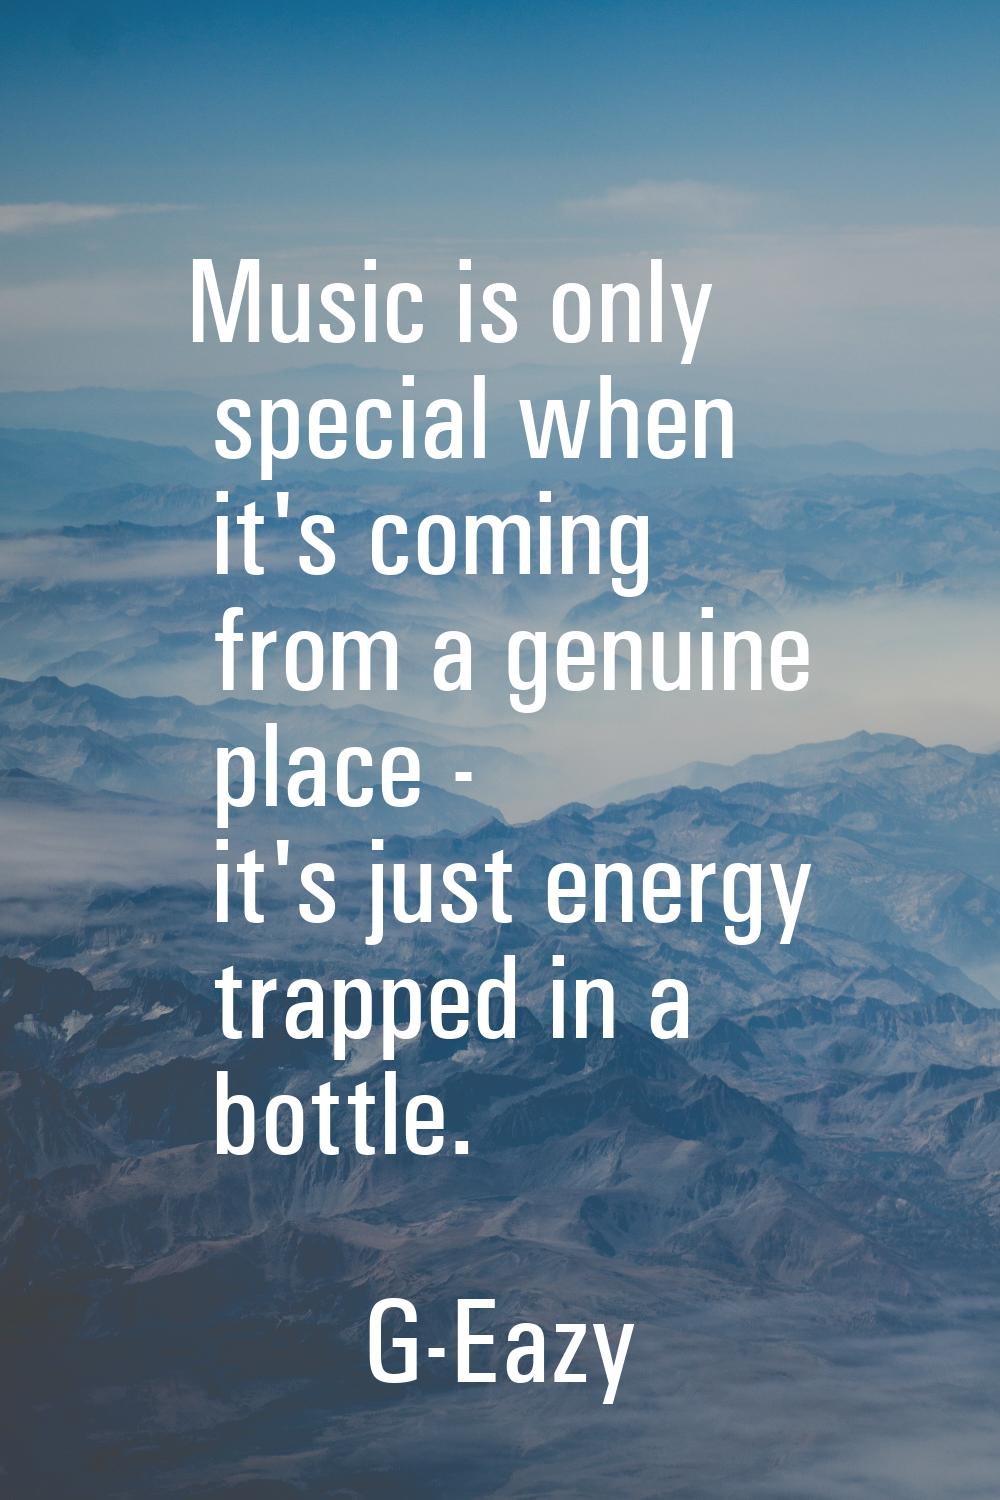 Music is only special when it's coming from a genuine place - it's just energy trapped in a bottle.